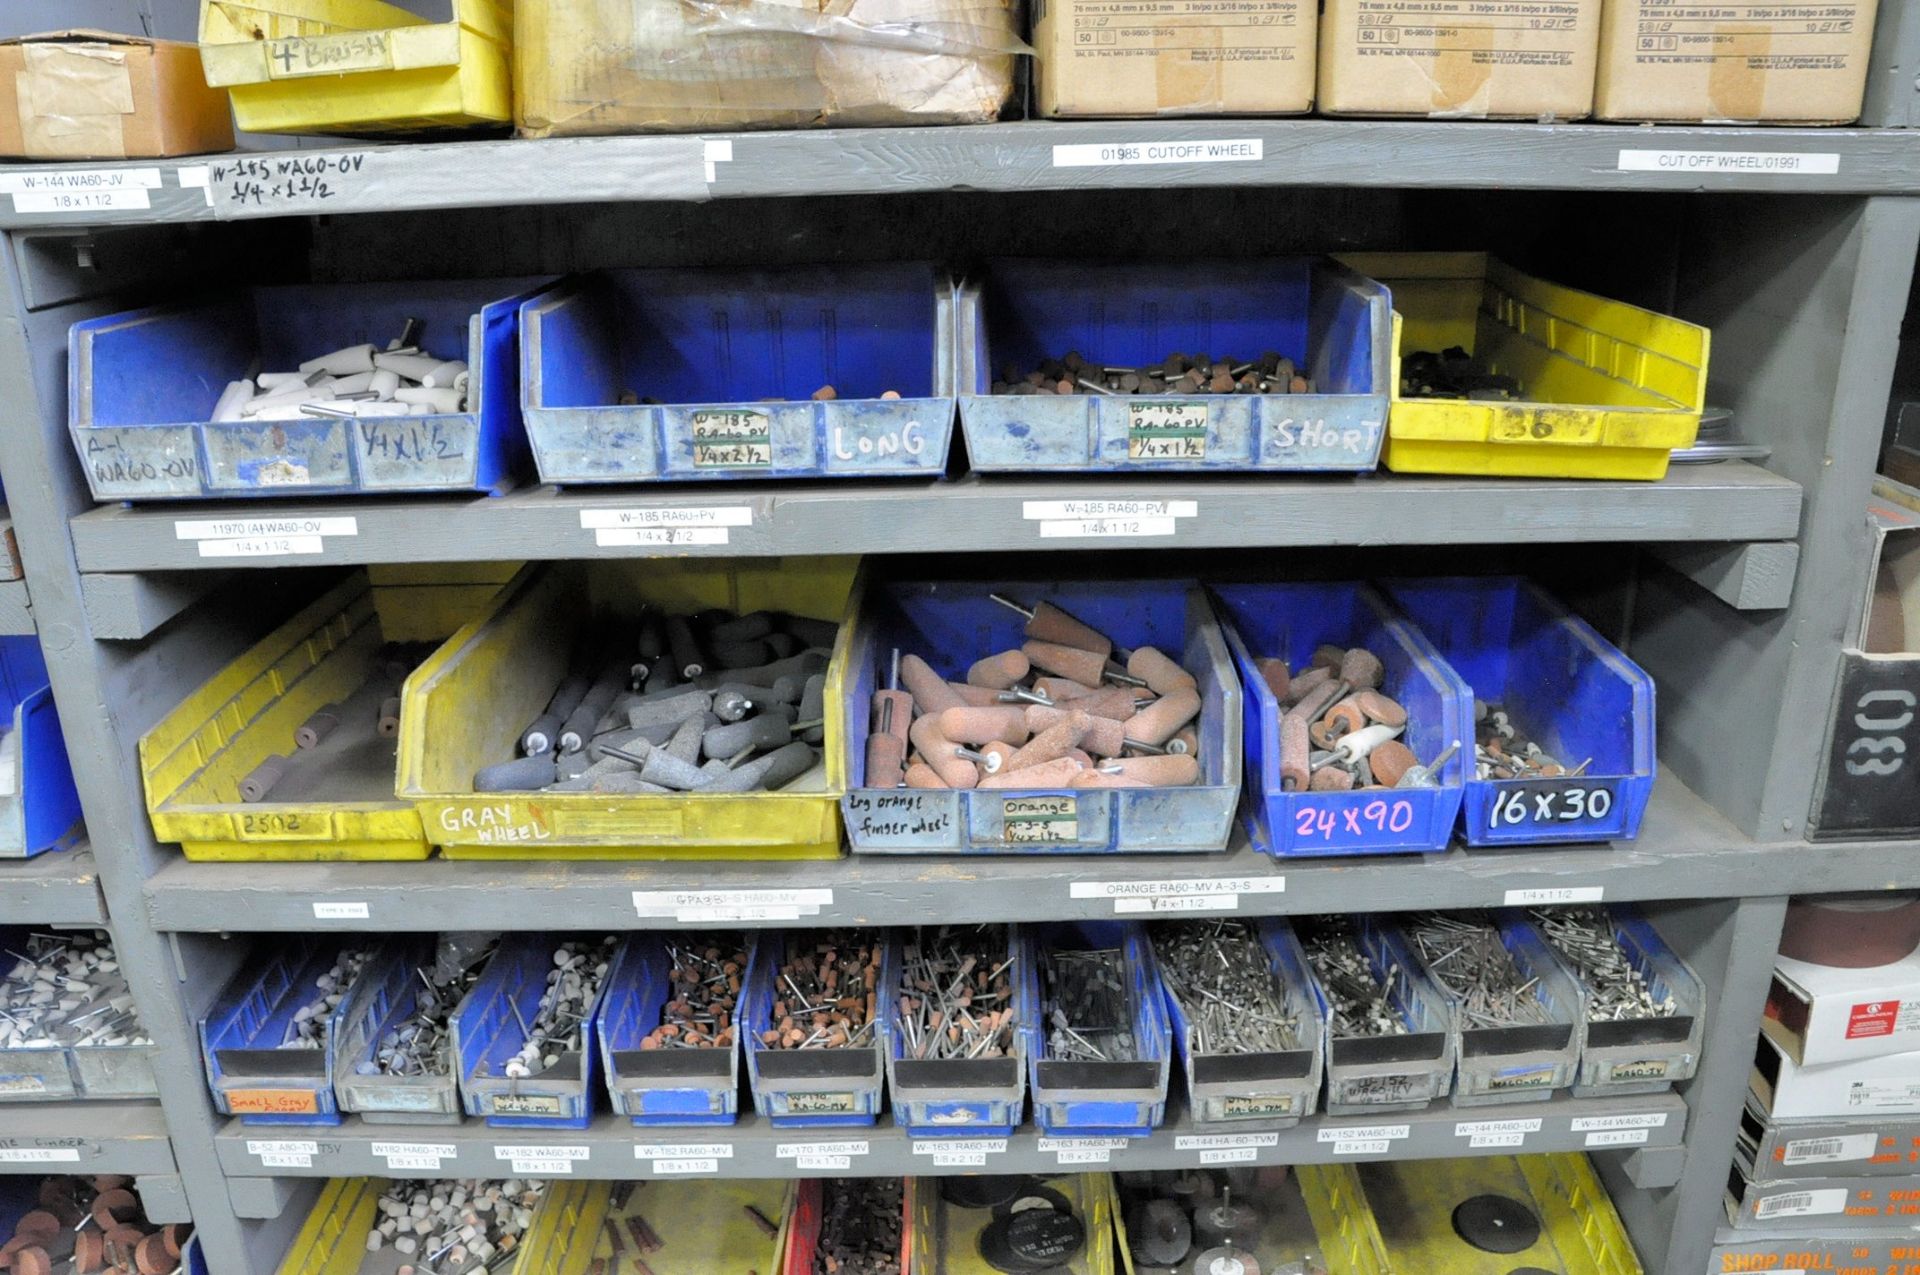 Lot-Grinding Stones, Sanding Supplies, etc. in (6) Sections and Top of Shelving Unit, (Shelving - Image 6 of 11